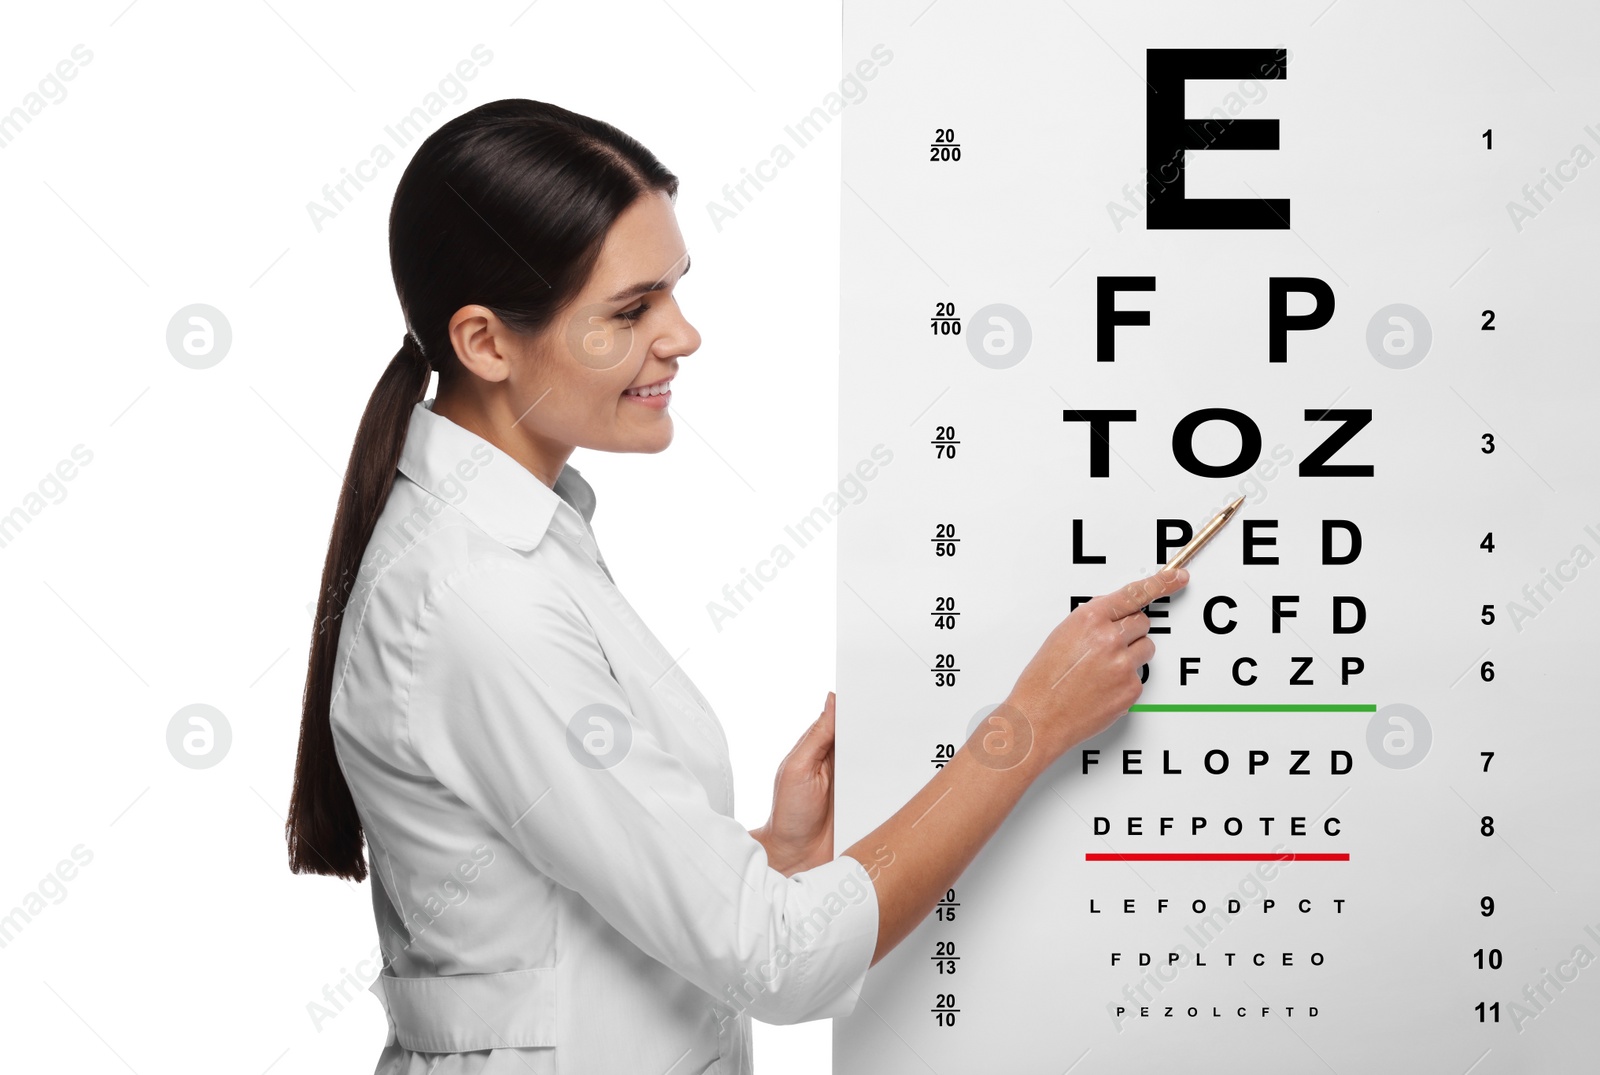 Image of Ophthalmologist pointing at vision test chart on white background